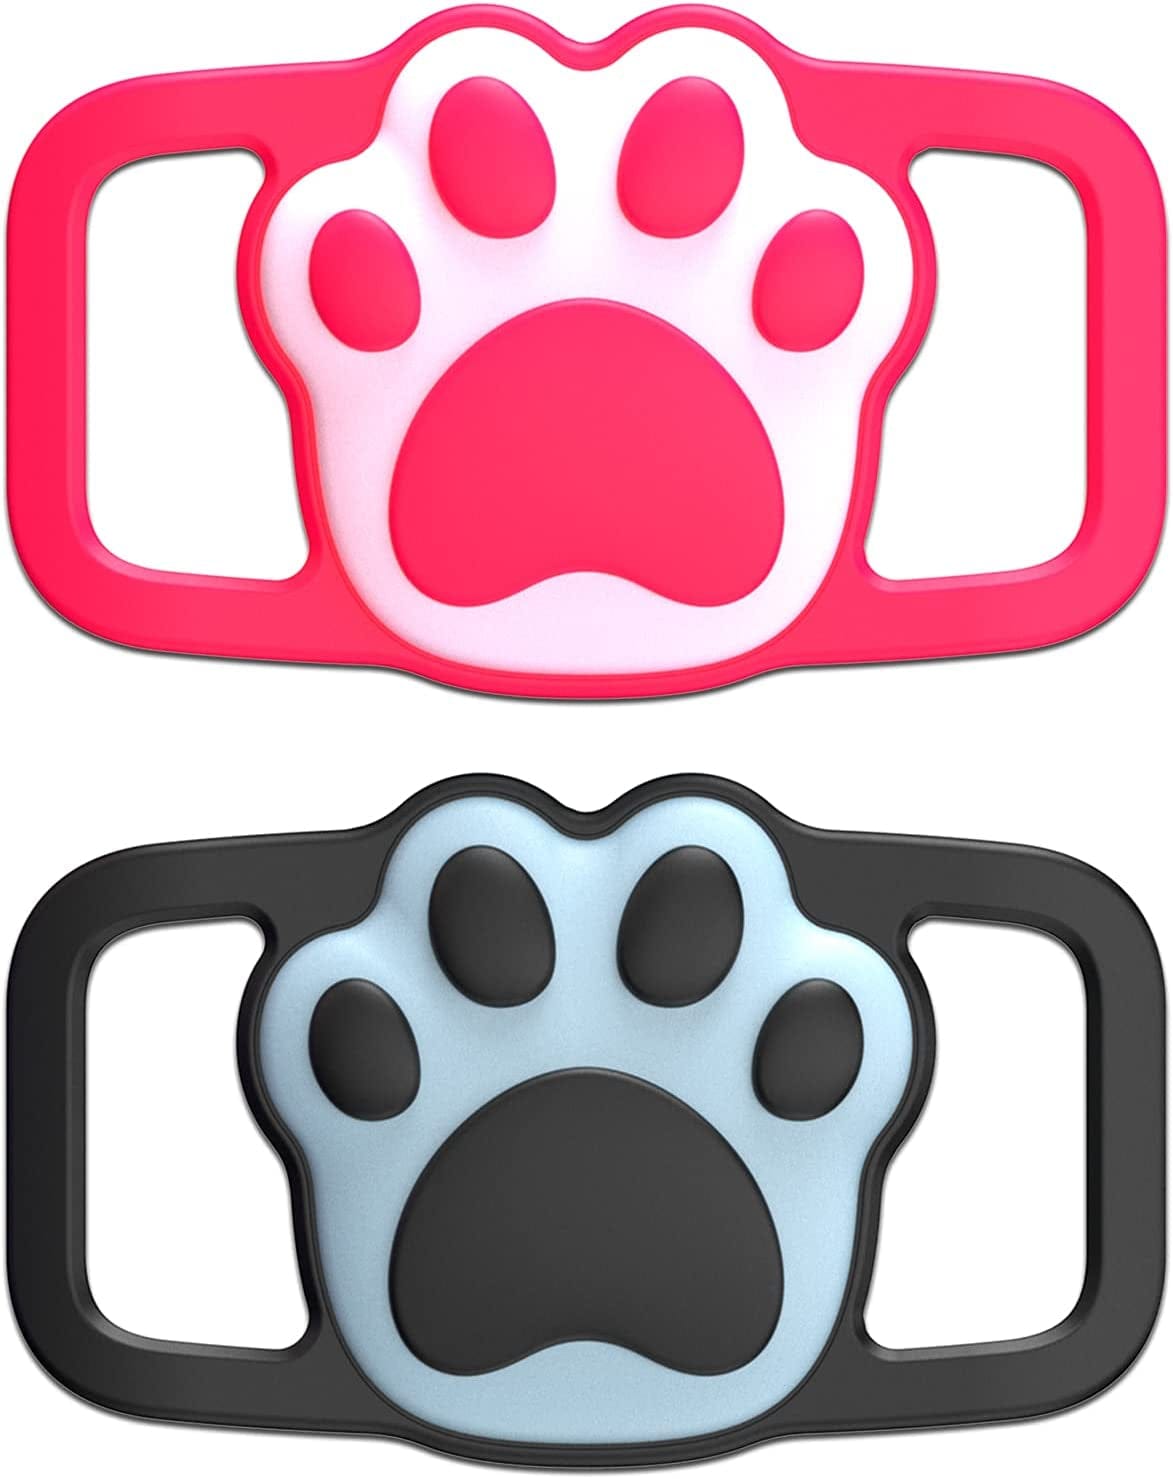 Wustentre Airtag Holder for Large Dog Collar, 2 Pack Air Tag Dog Collar Holder, Airtags Accessories Big Pet Loop Holder, Lightweight Soft Silicone Airtag Case anti Scratch anti Lost (Pink+Blue)